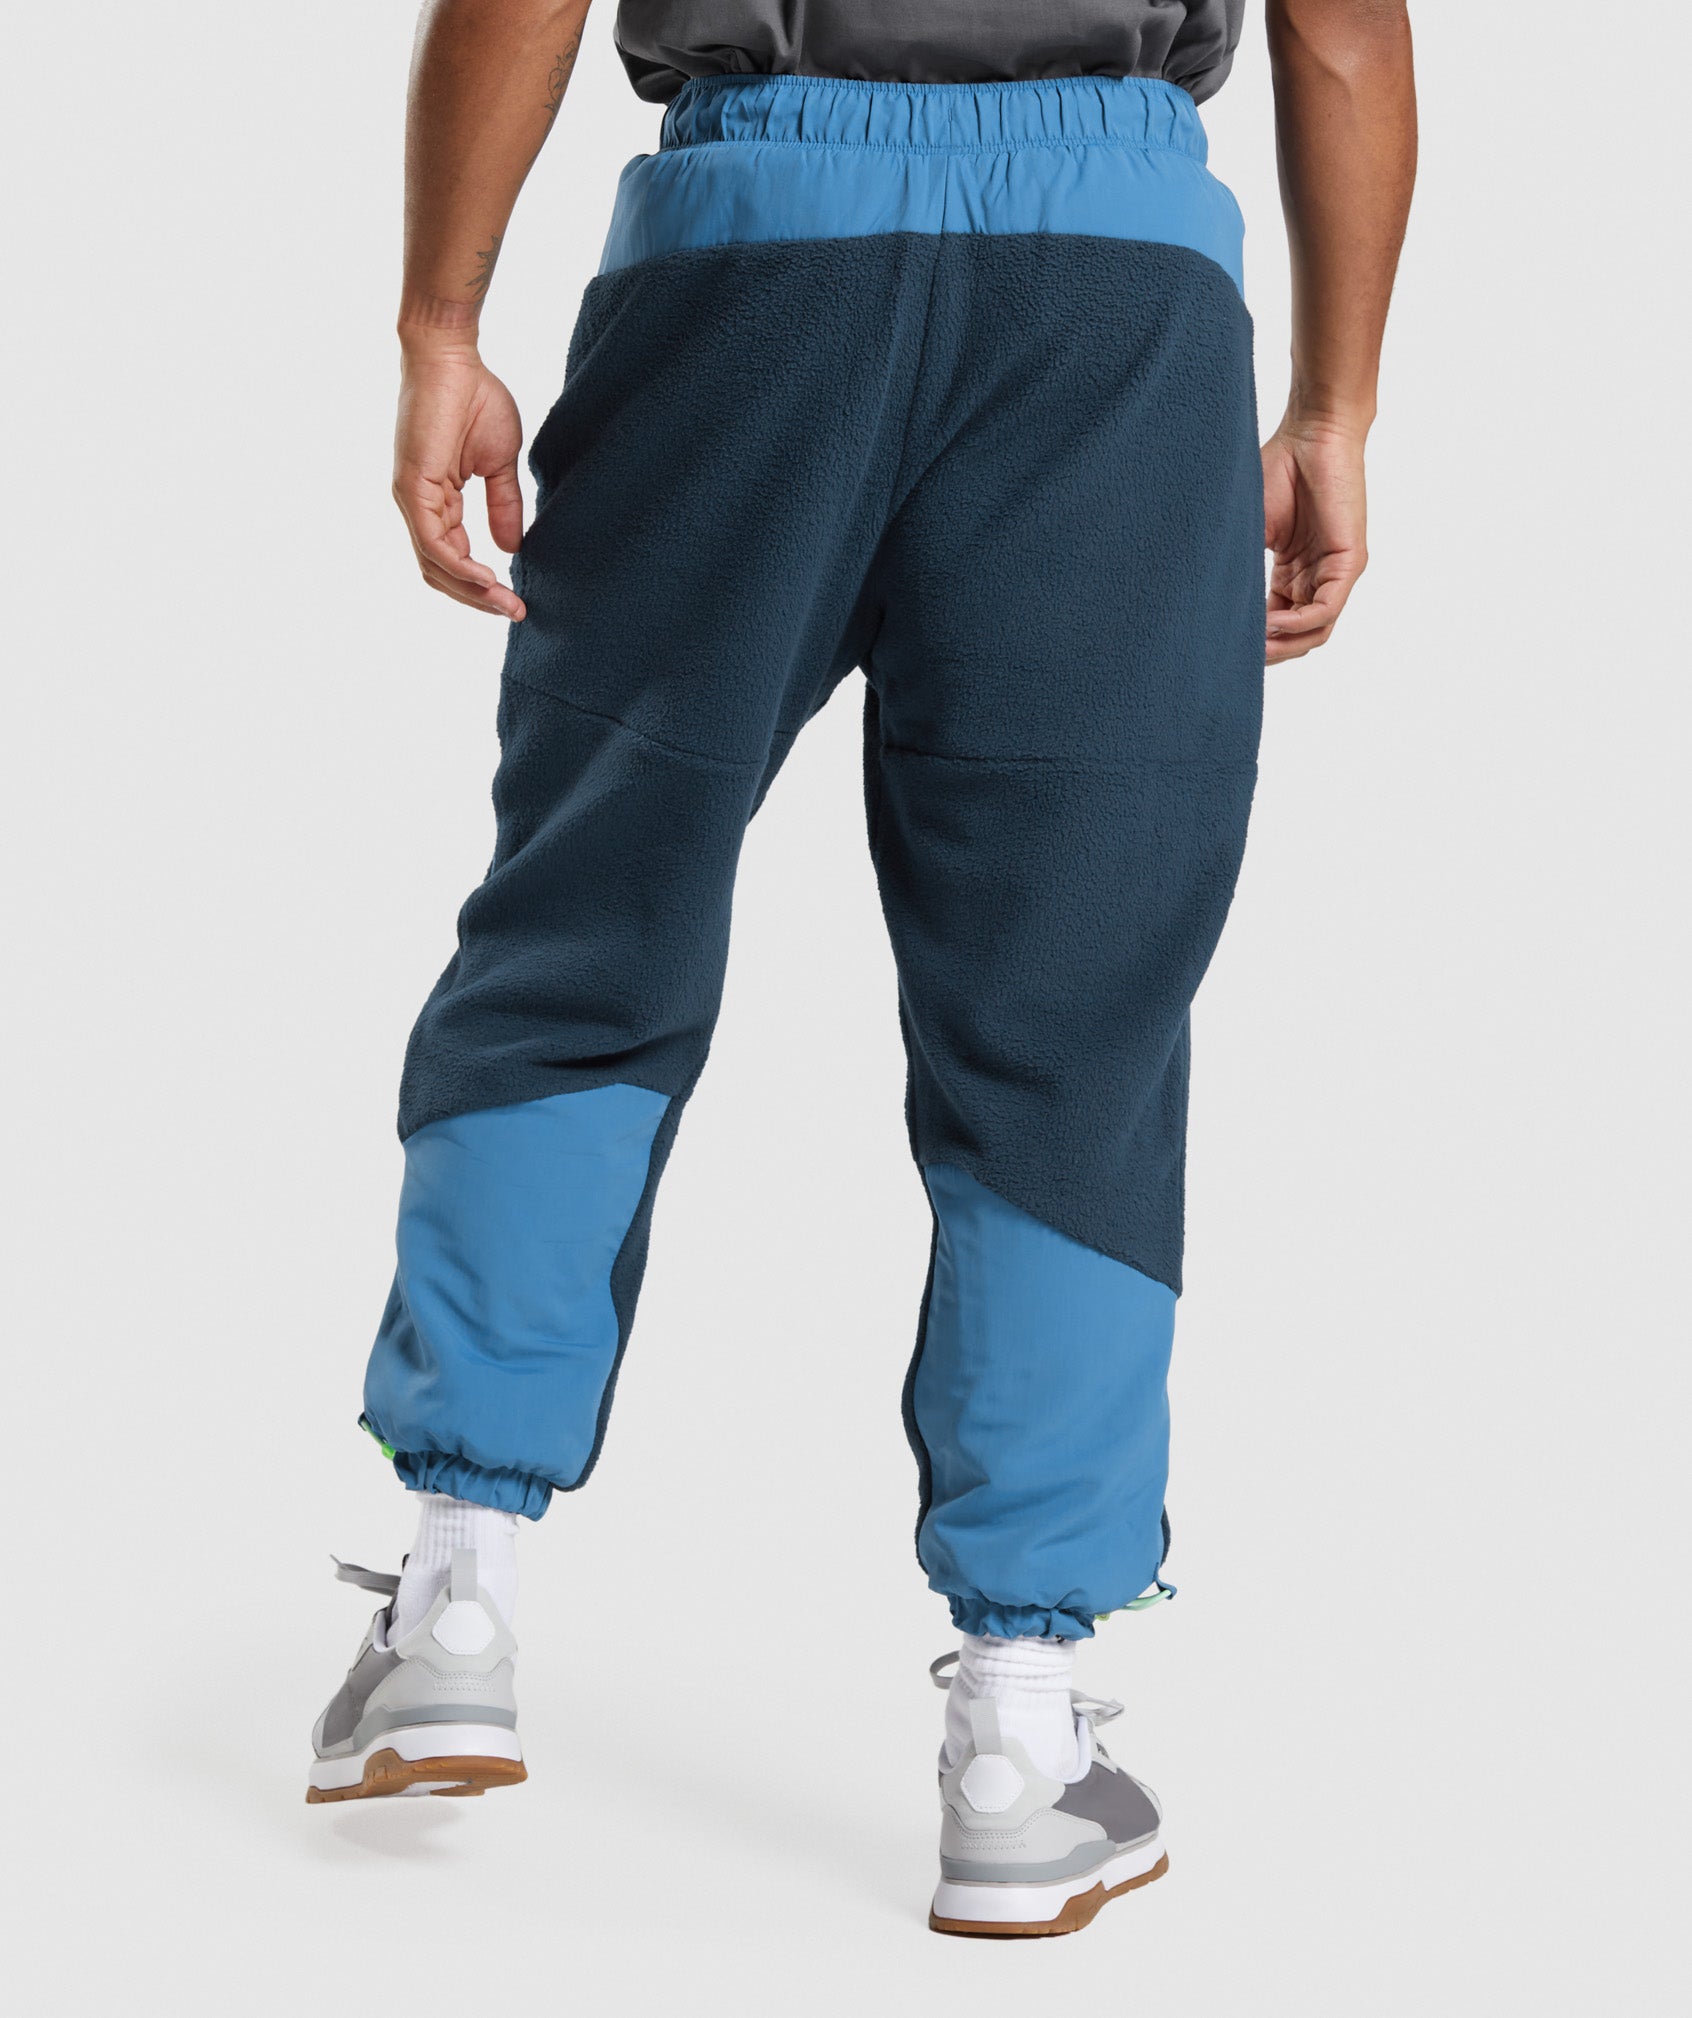 Vibes Joggers in Navy/Lakeside Blue